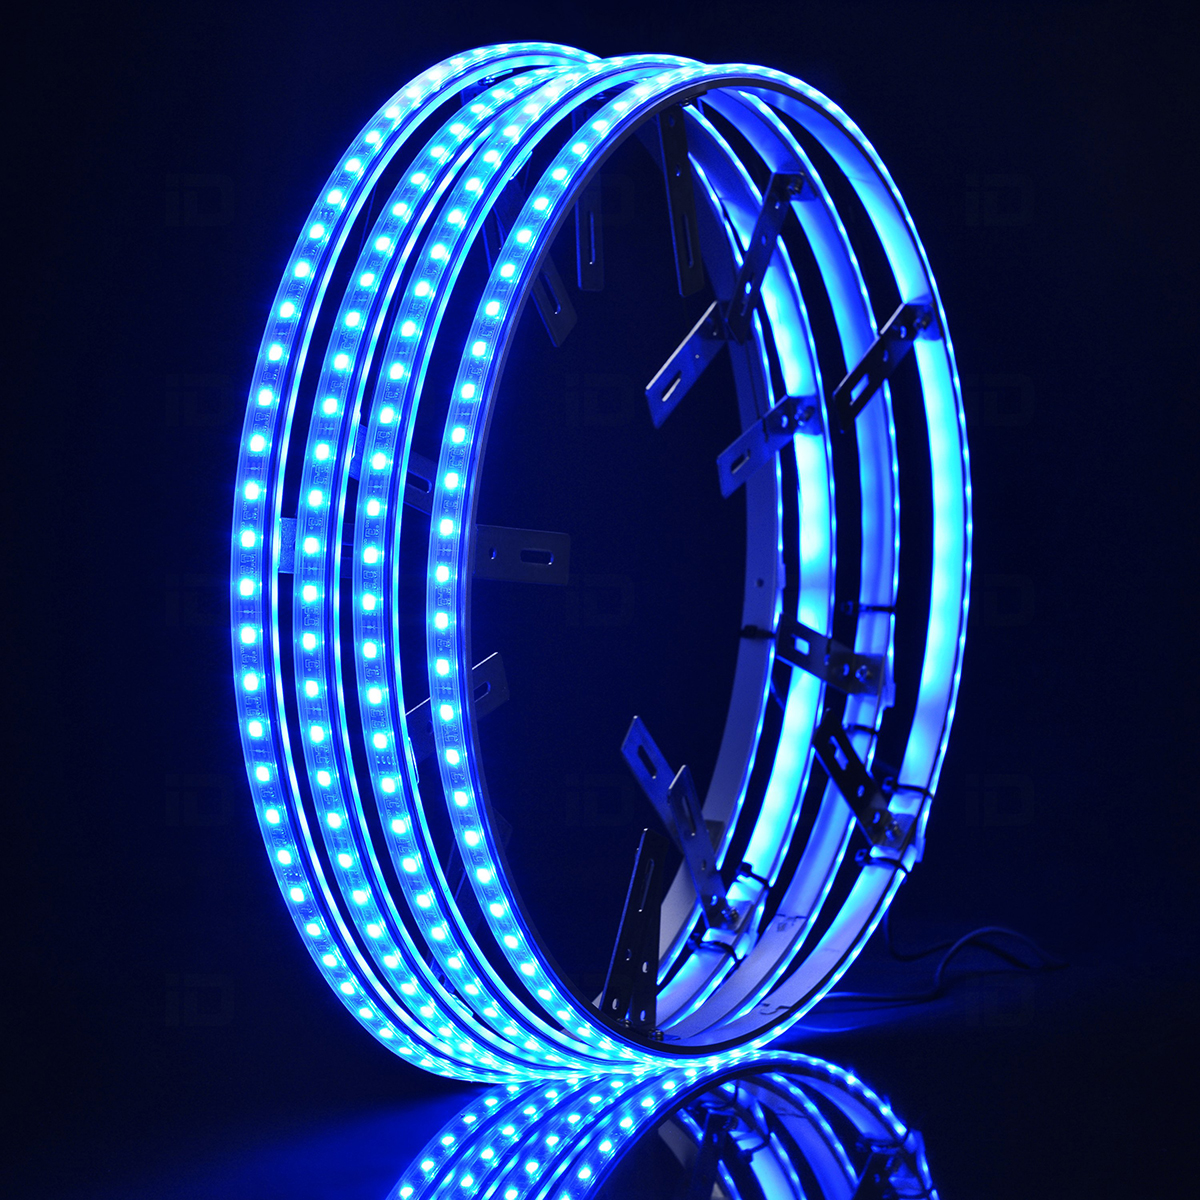 COLORSMART BLUETOOTH CONTROLLED 17INCH LED WHEEL LIGHT KITS WITH 16 MILLION COLORS